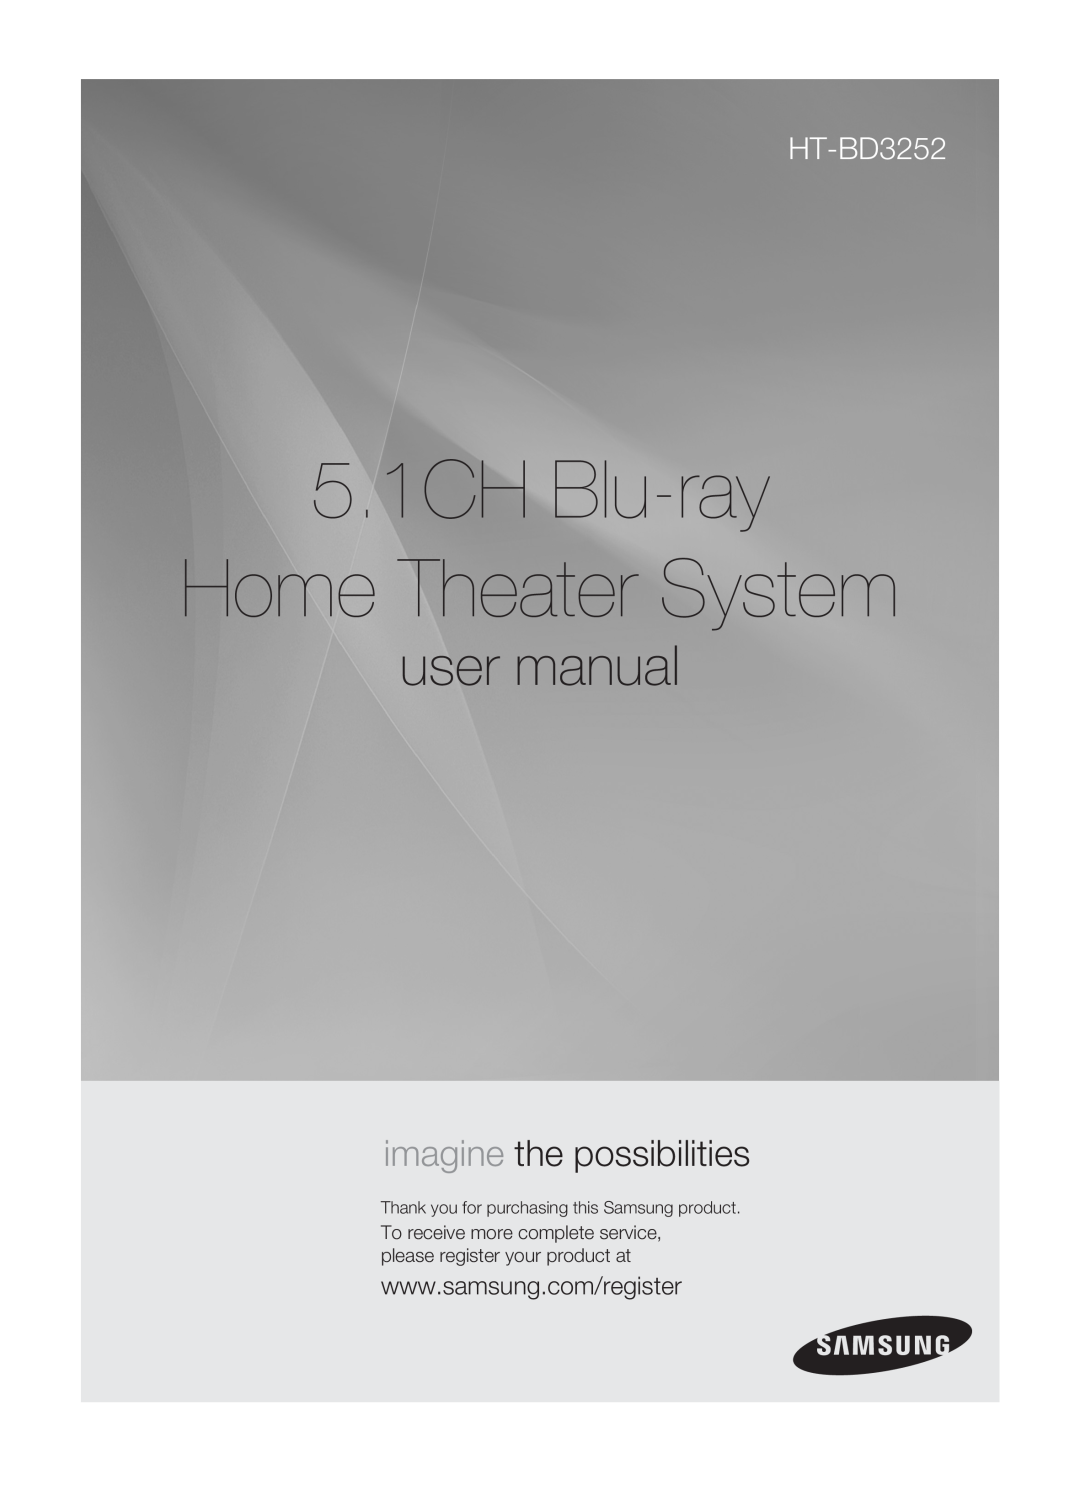 Samsung HT-BD3252A, AH68-02231A user manual 5.1CH Blu-ray Home Theater System, imagine the possibilities 